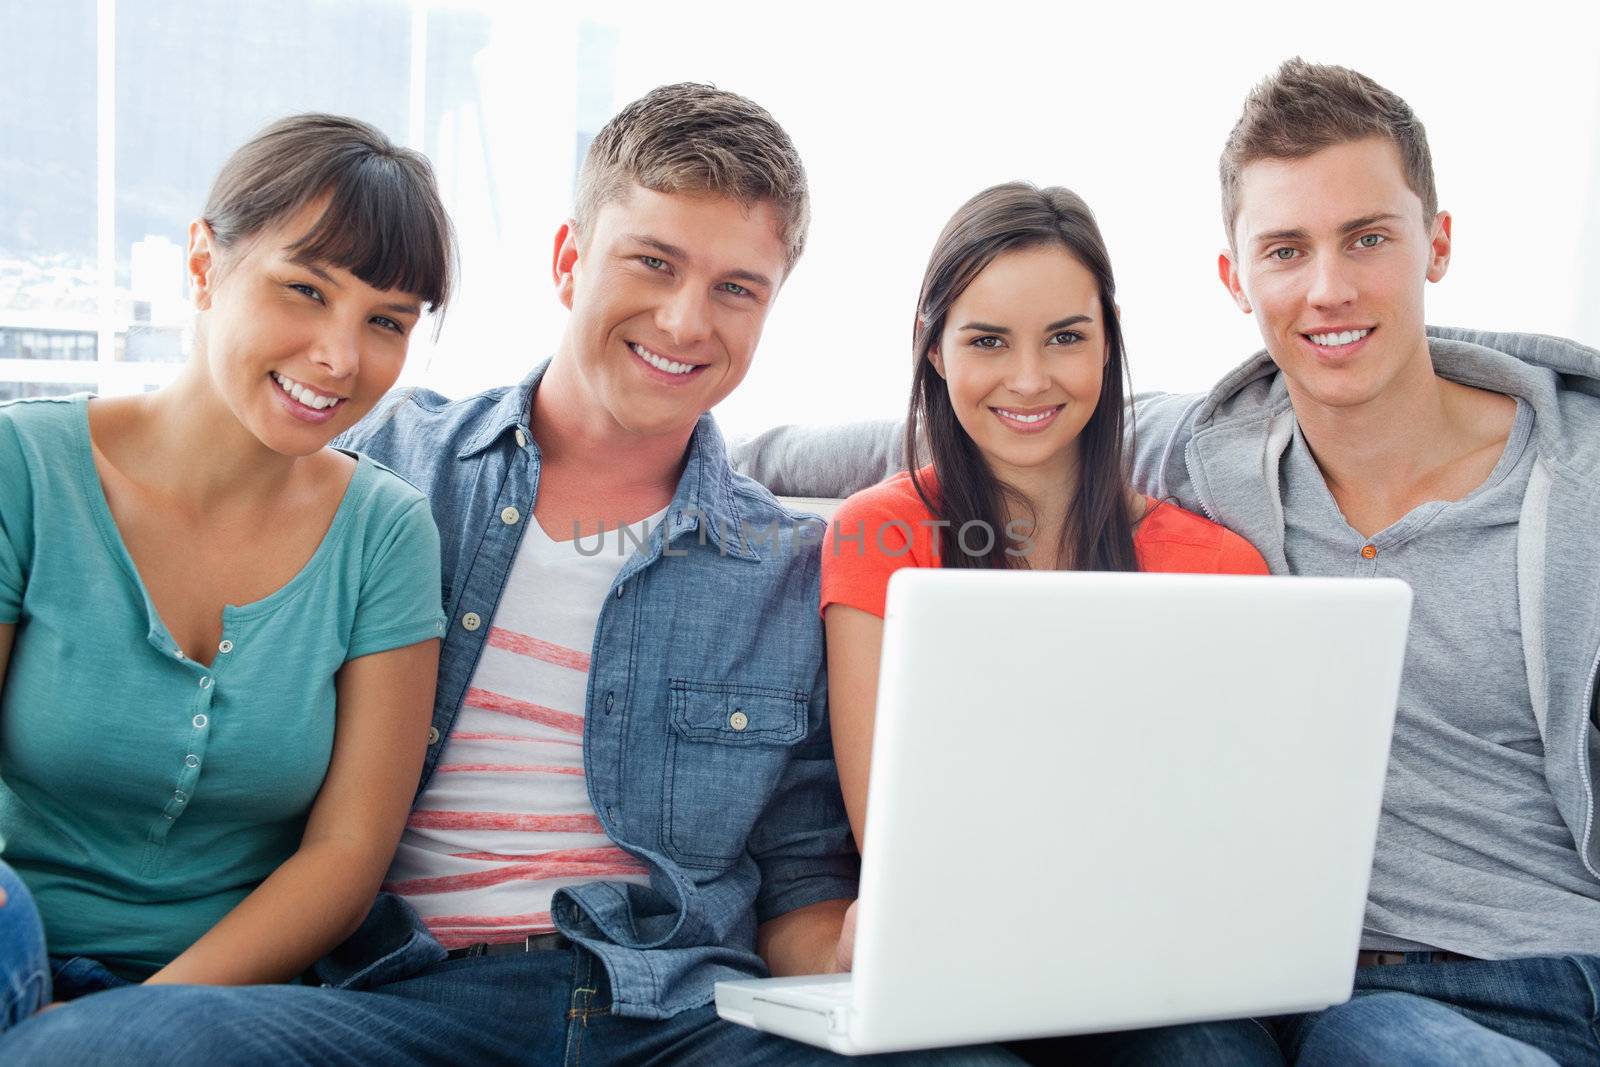 A group of friends sit on the couch together as they hold a laptop and look a the camera 